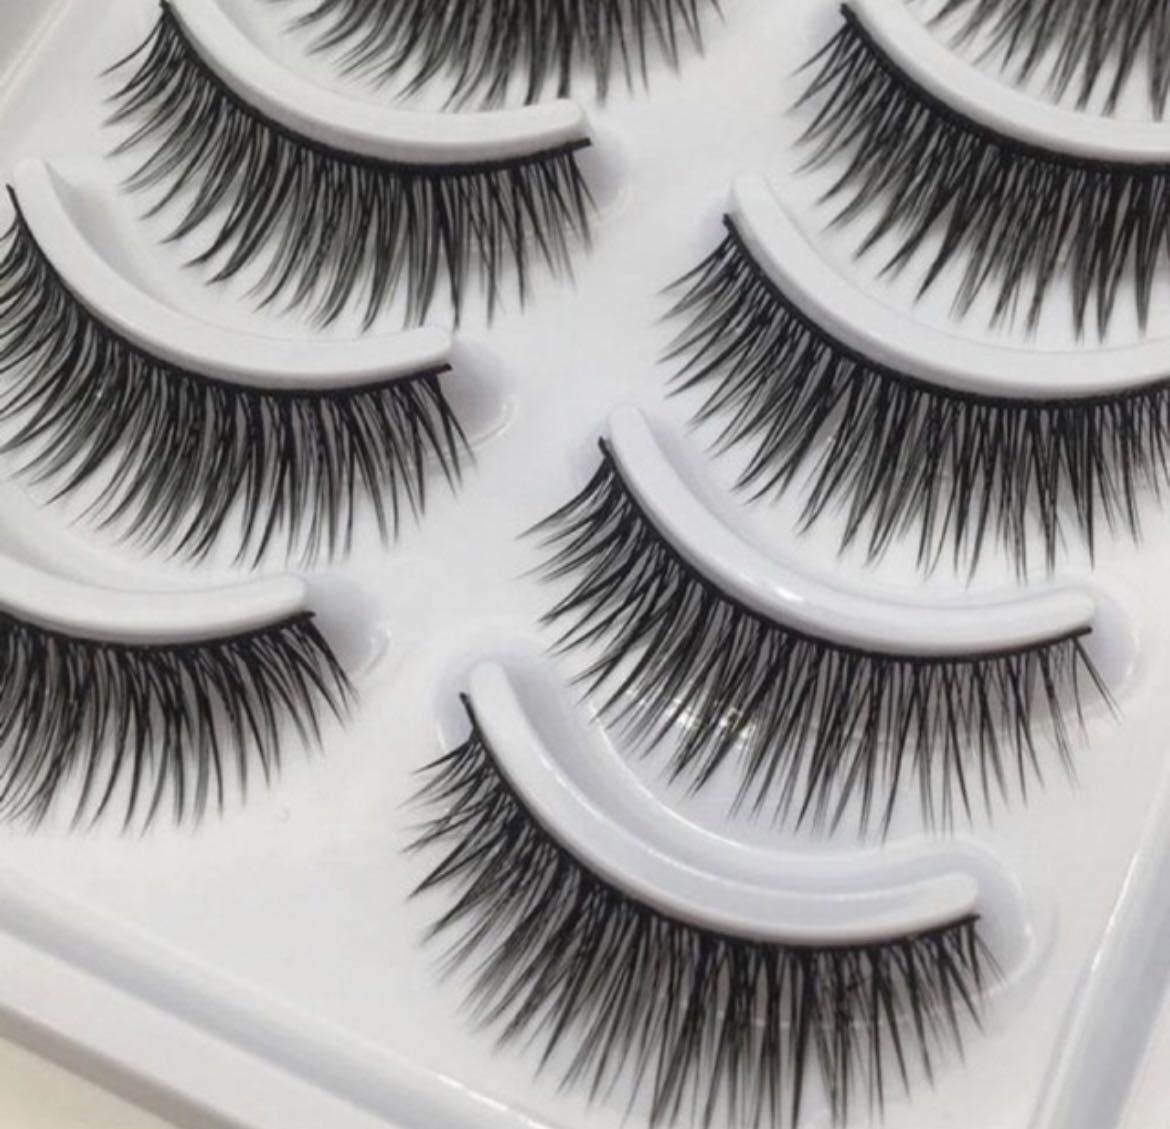  eyelashes extensions 10 pair new goods 12mm eyelashes extensions diamond Rush eyelashes extensions eyelashes pair eyelashes black 10 pair pack eyelashes extensions 